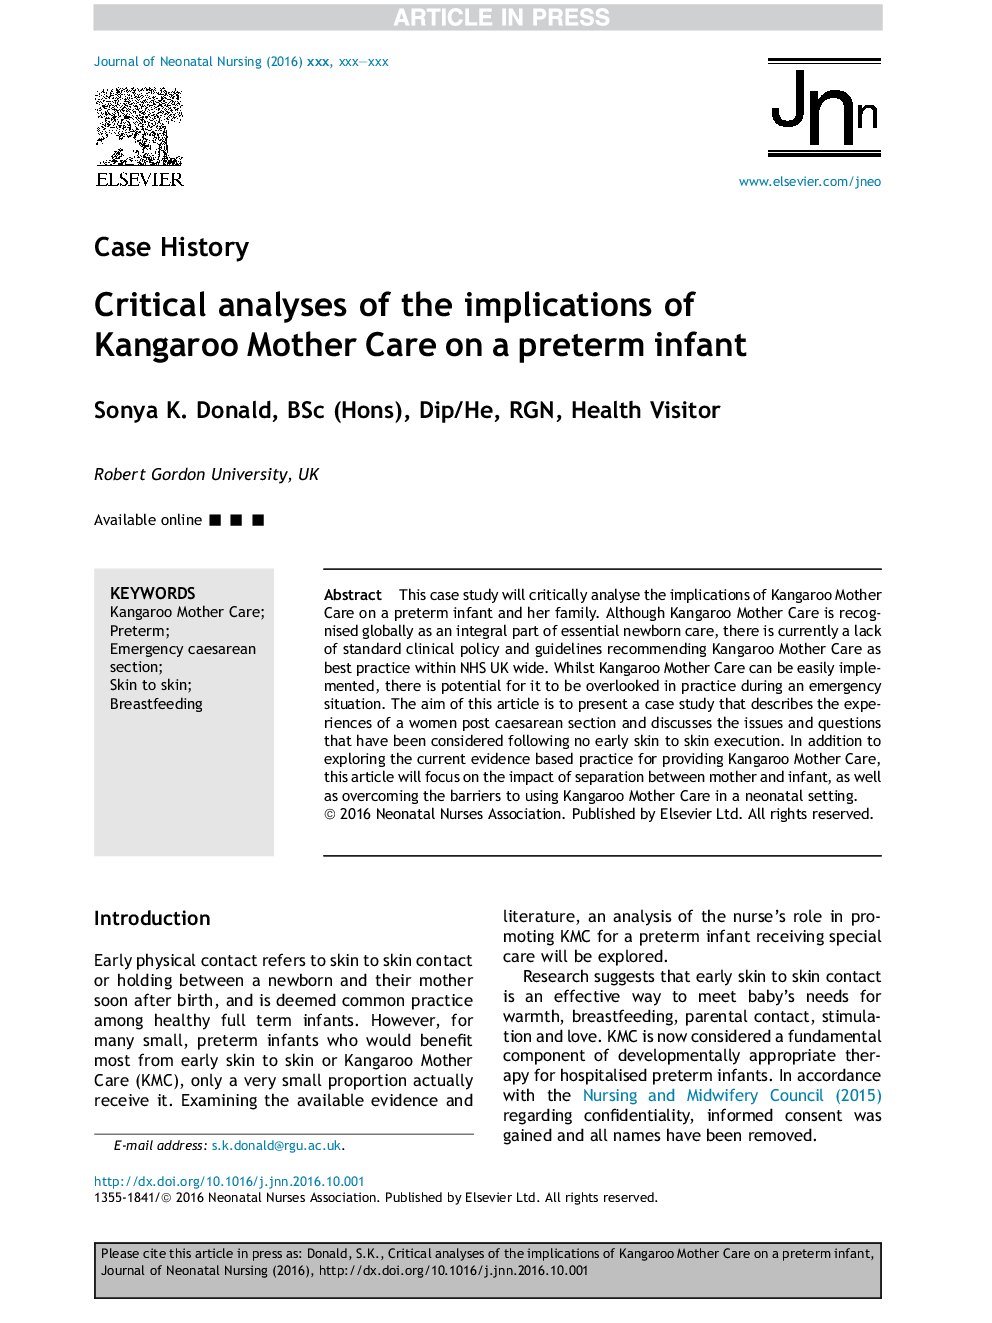 Critical analyses of the implications of Kangaroo Mother Care on a preterm infant